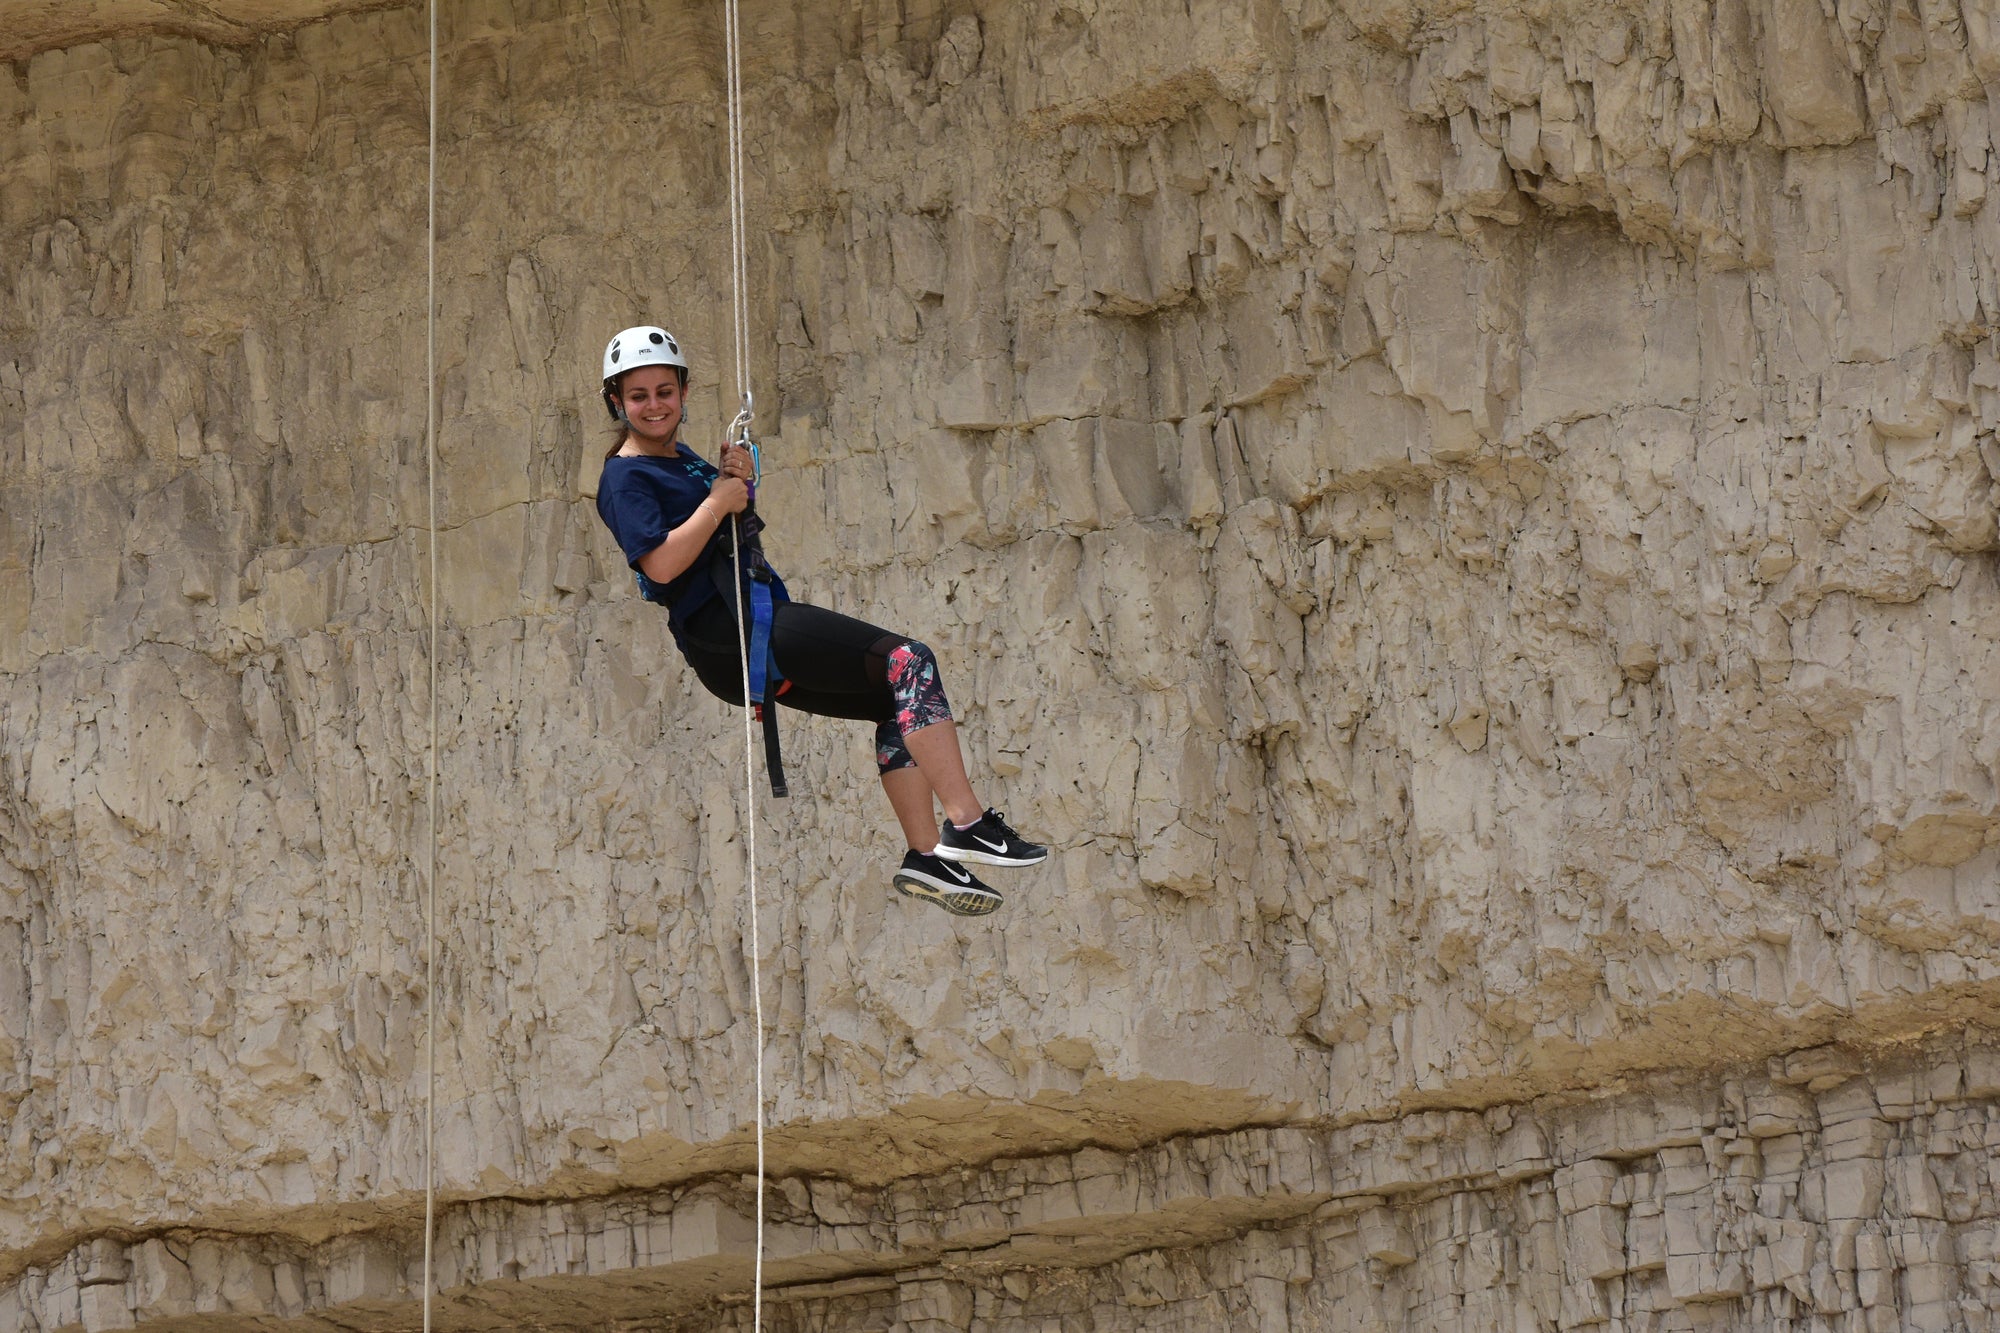 Rappelling Nahal Tamar: conquering the vertical limits of the Judean desert